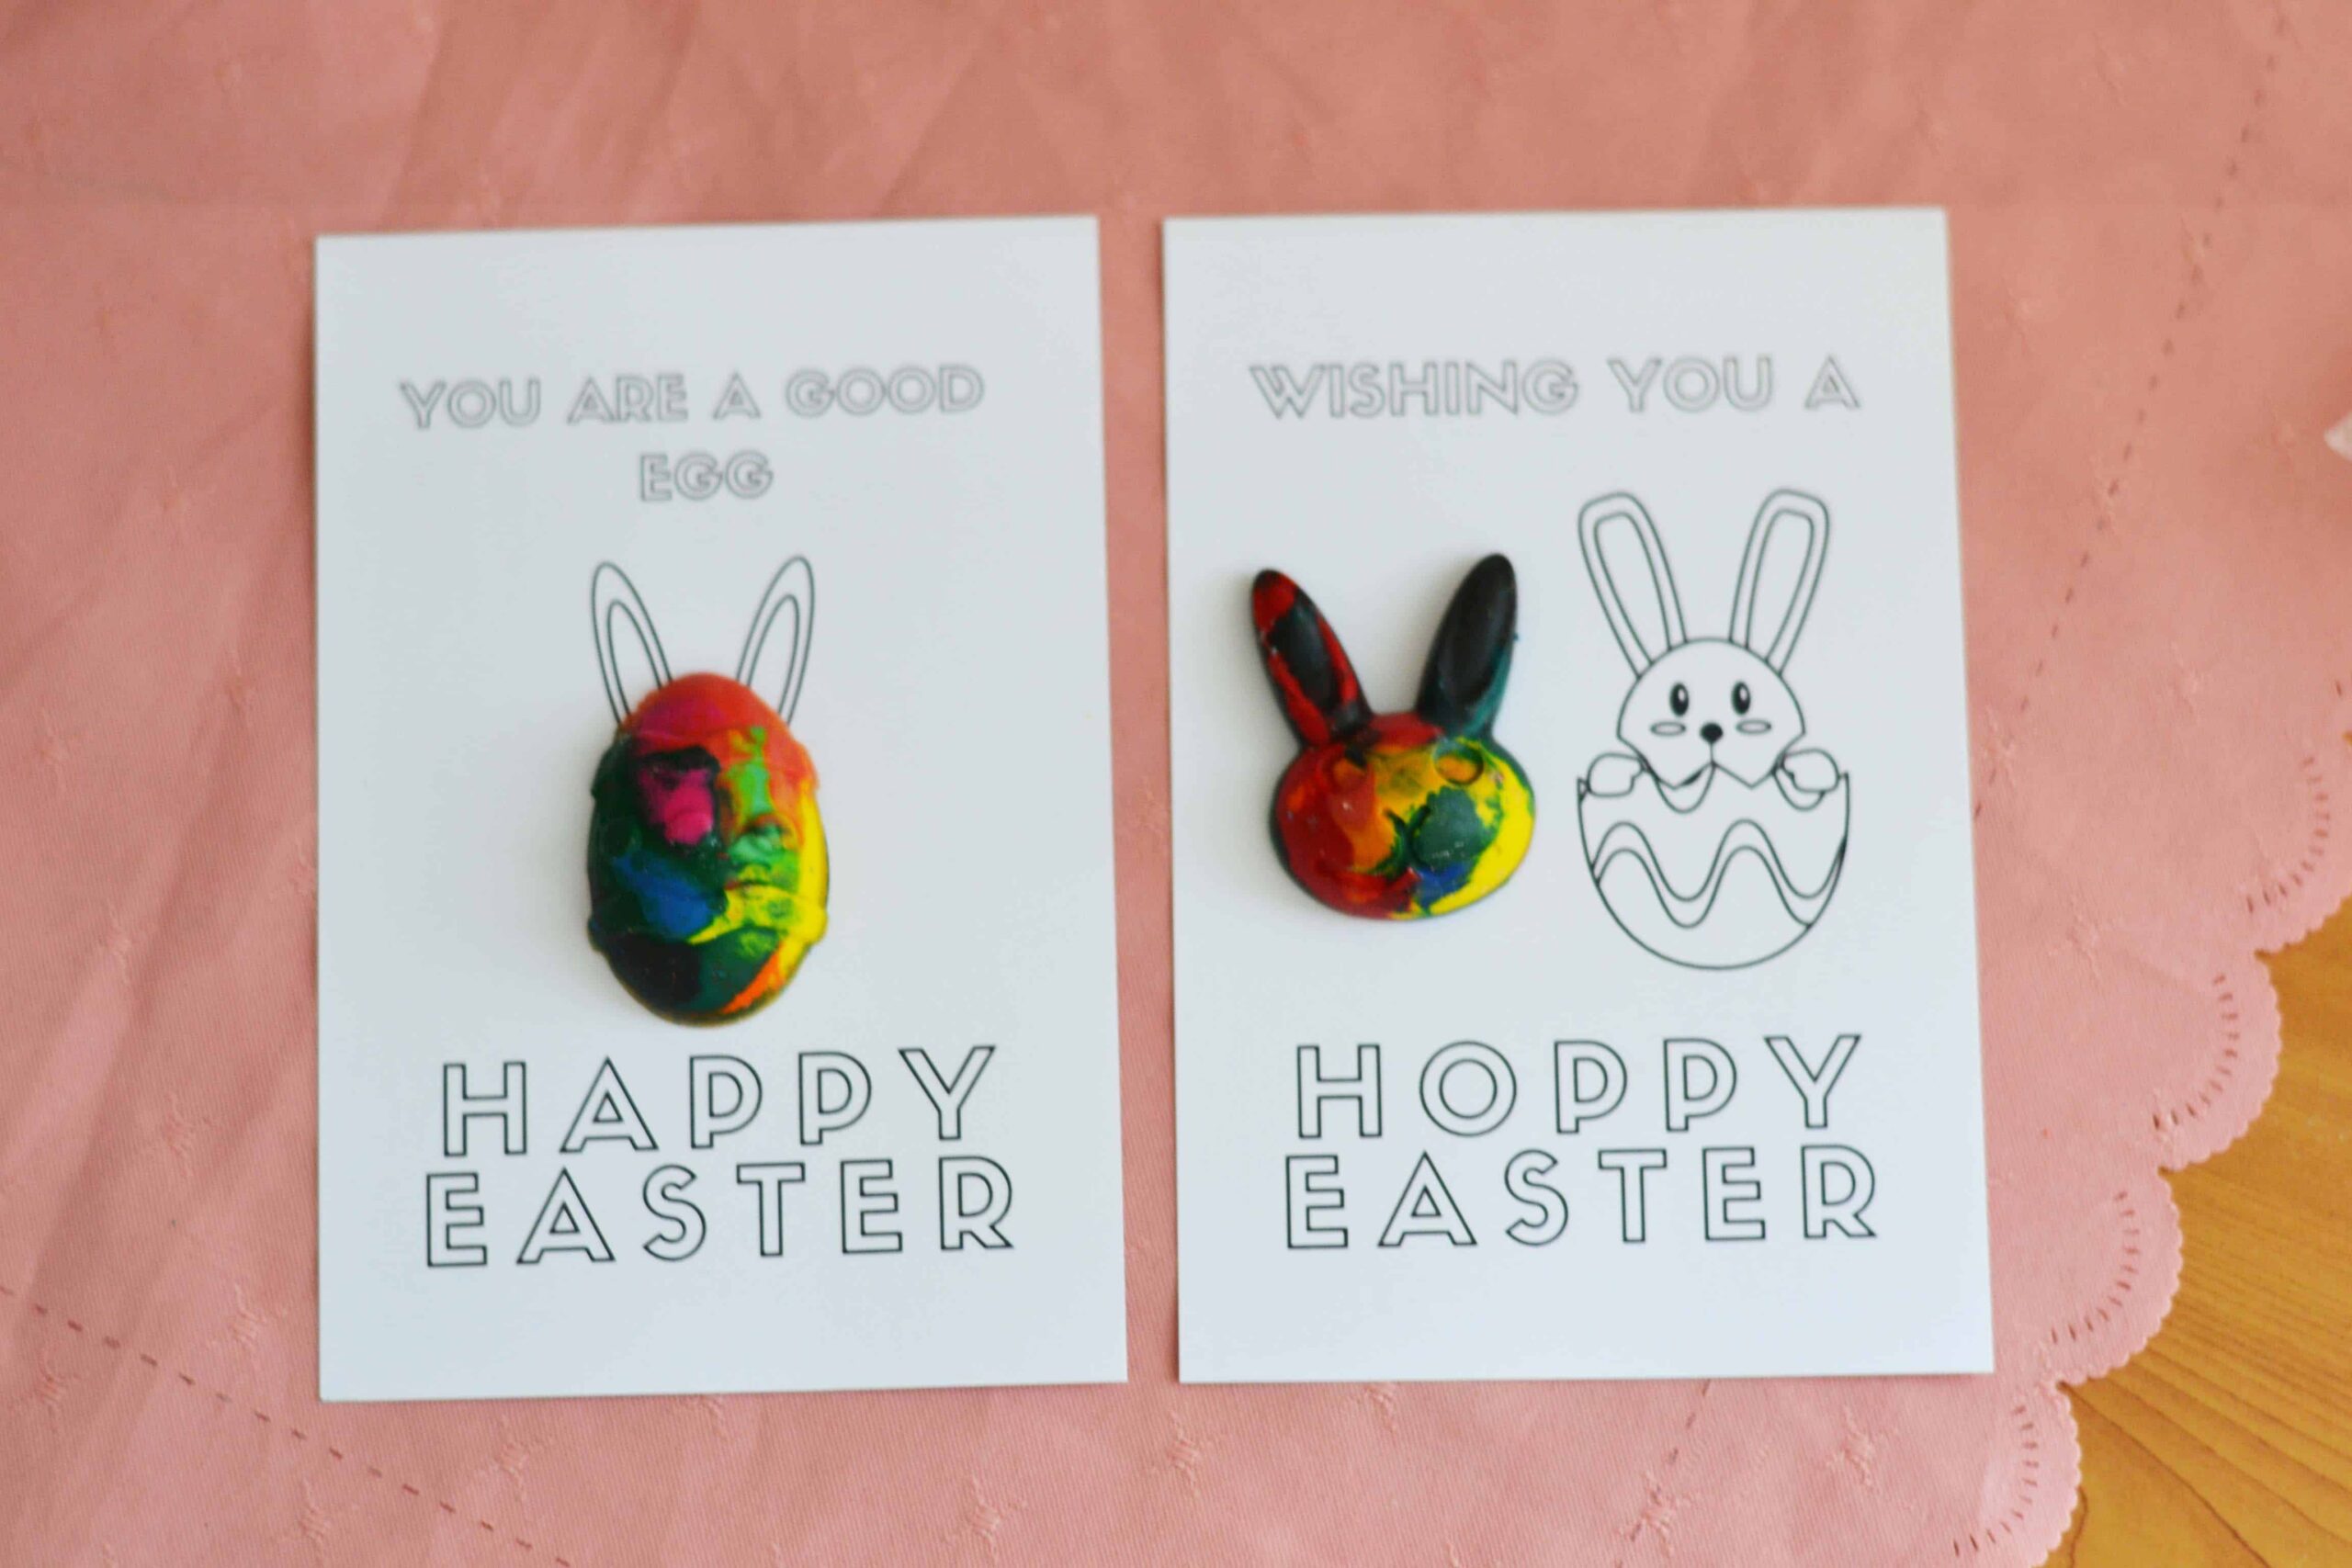 Printable easter cards with wishing you a hoppy easter and you are a good egg